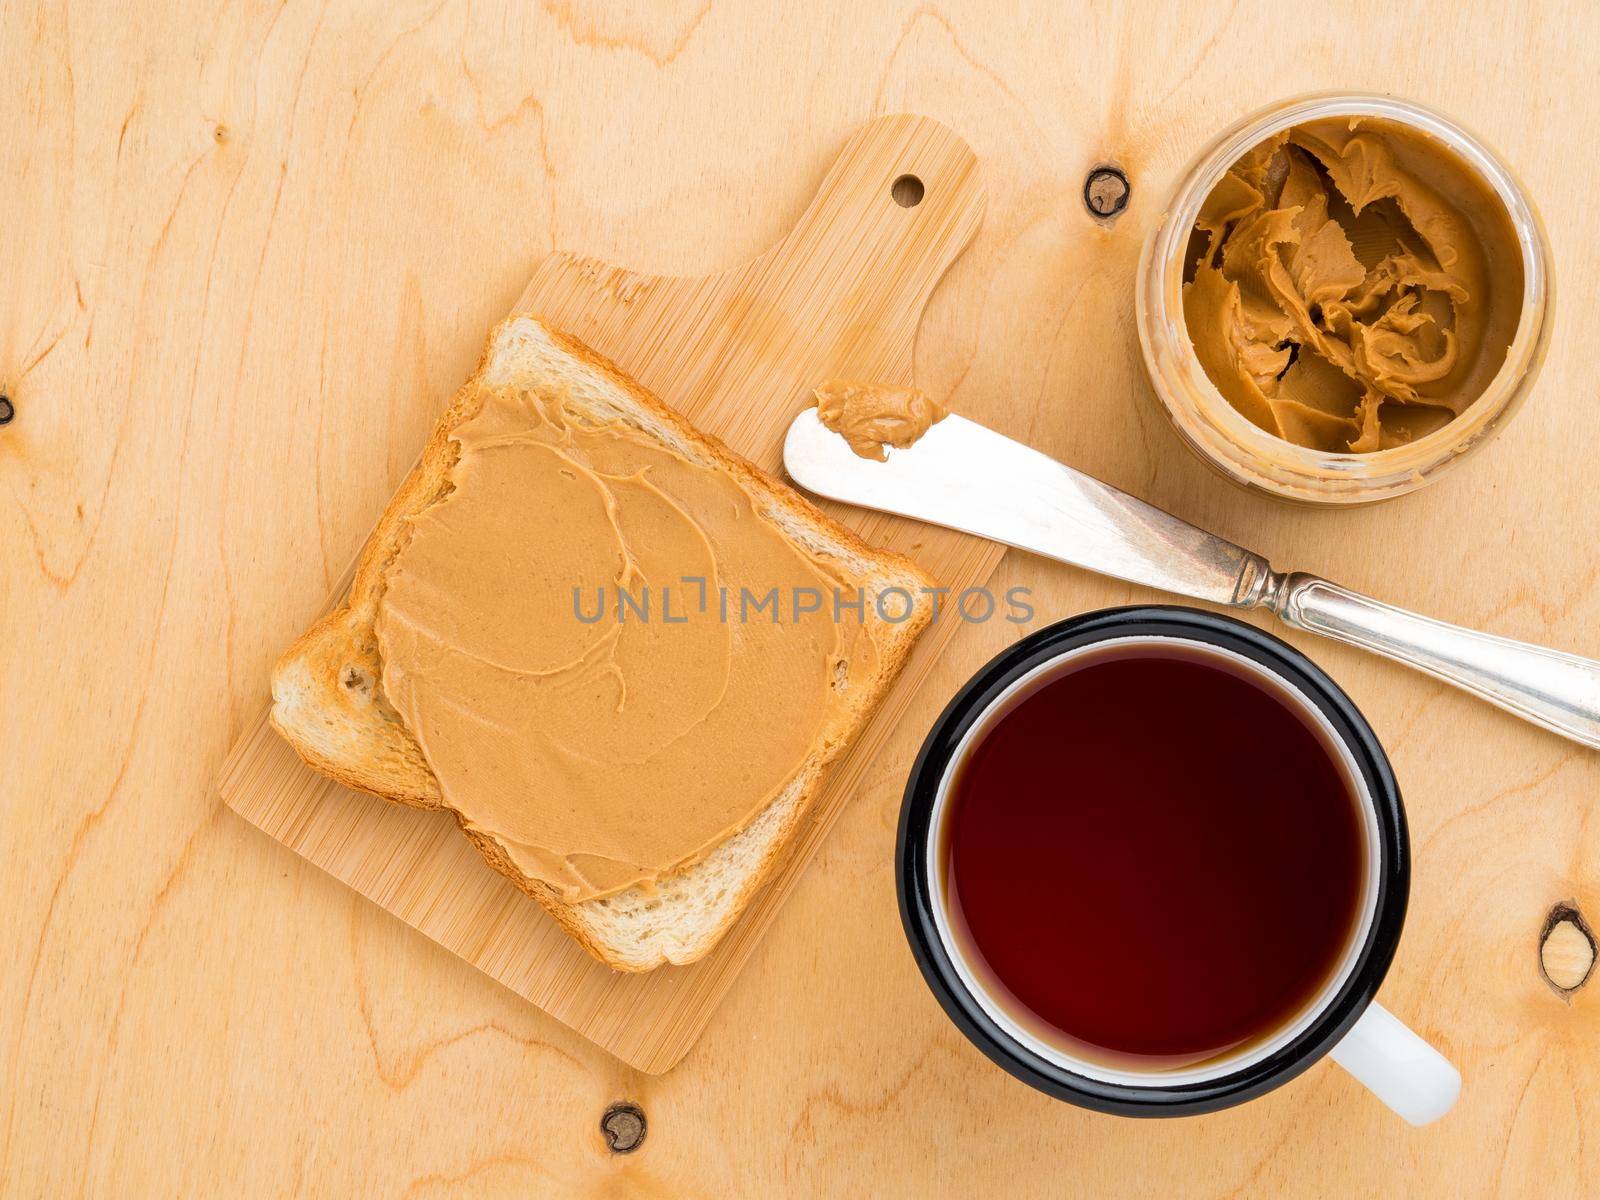 toast with peanut butter, knife for spreading on a sandwich, a mug of tea on a beige wood background by NataBene